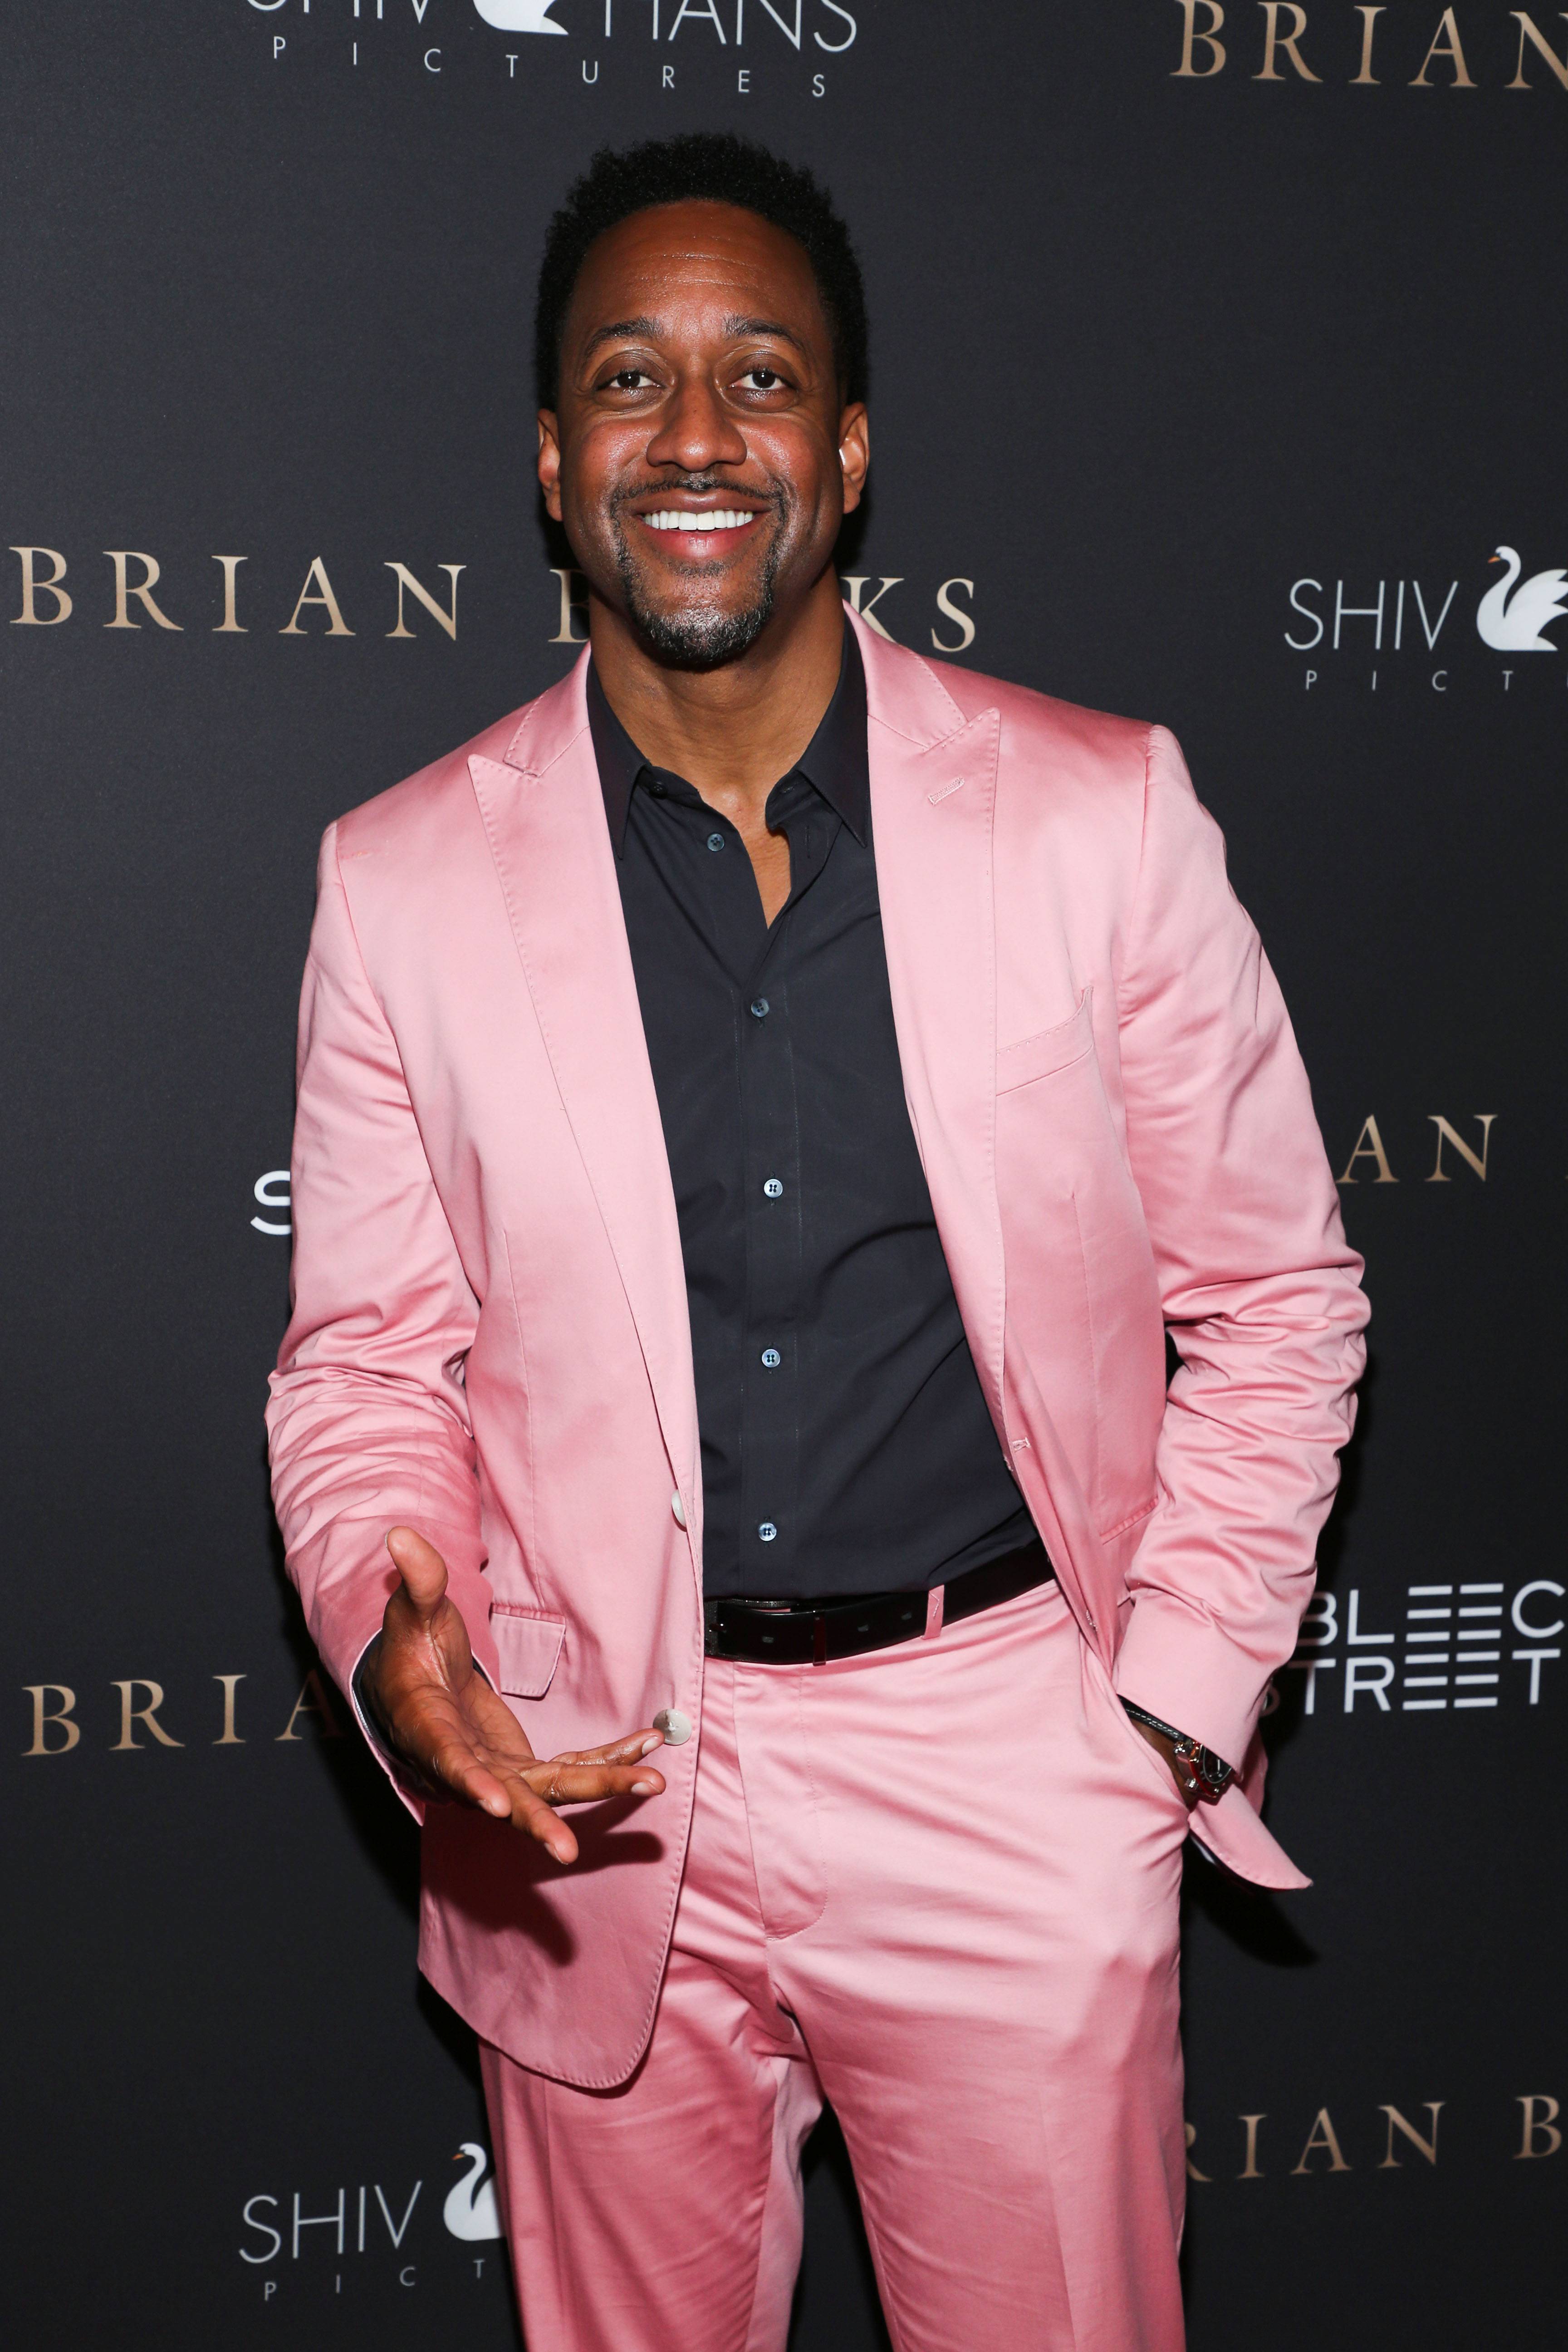 LONG BEACH, CALIFORNIA - JULY 31: Jaleel White attends the Los Angeles special screening of Bleeker Street's "Brian Banks" at Edwards Long Beach Stadium 26 & IMAX on July 31, 2019 in Long Beach, California. (Photo by Phillip Faraone/Getty Images)